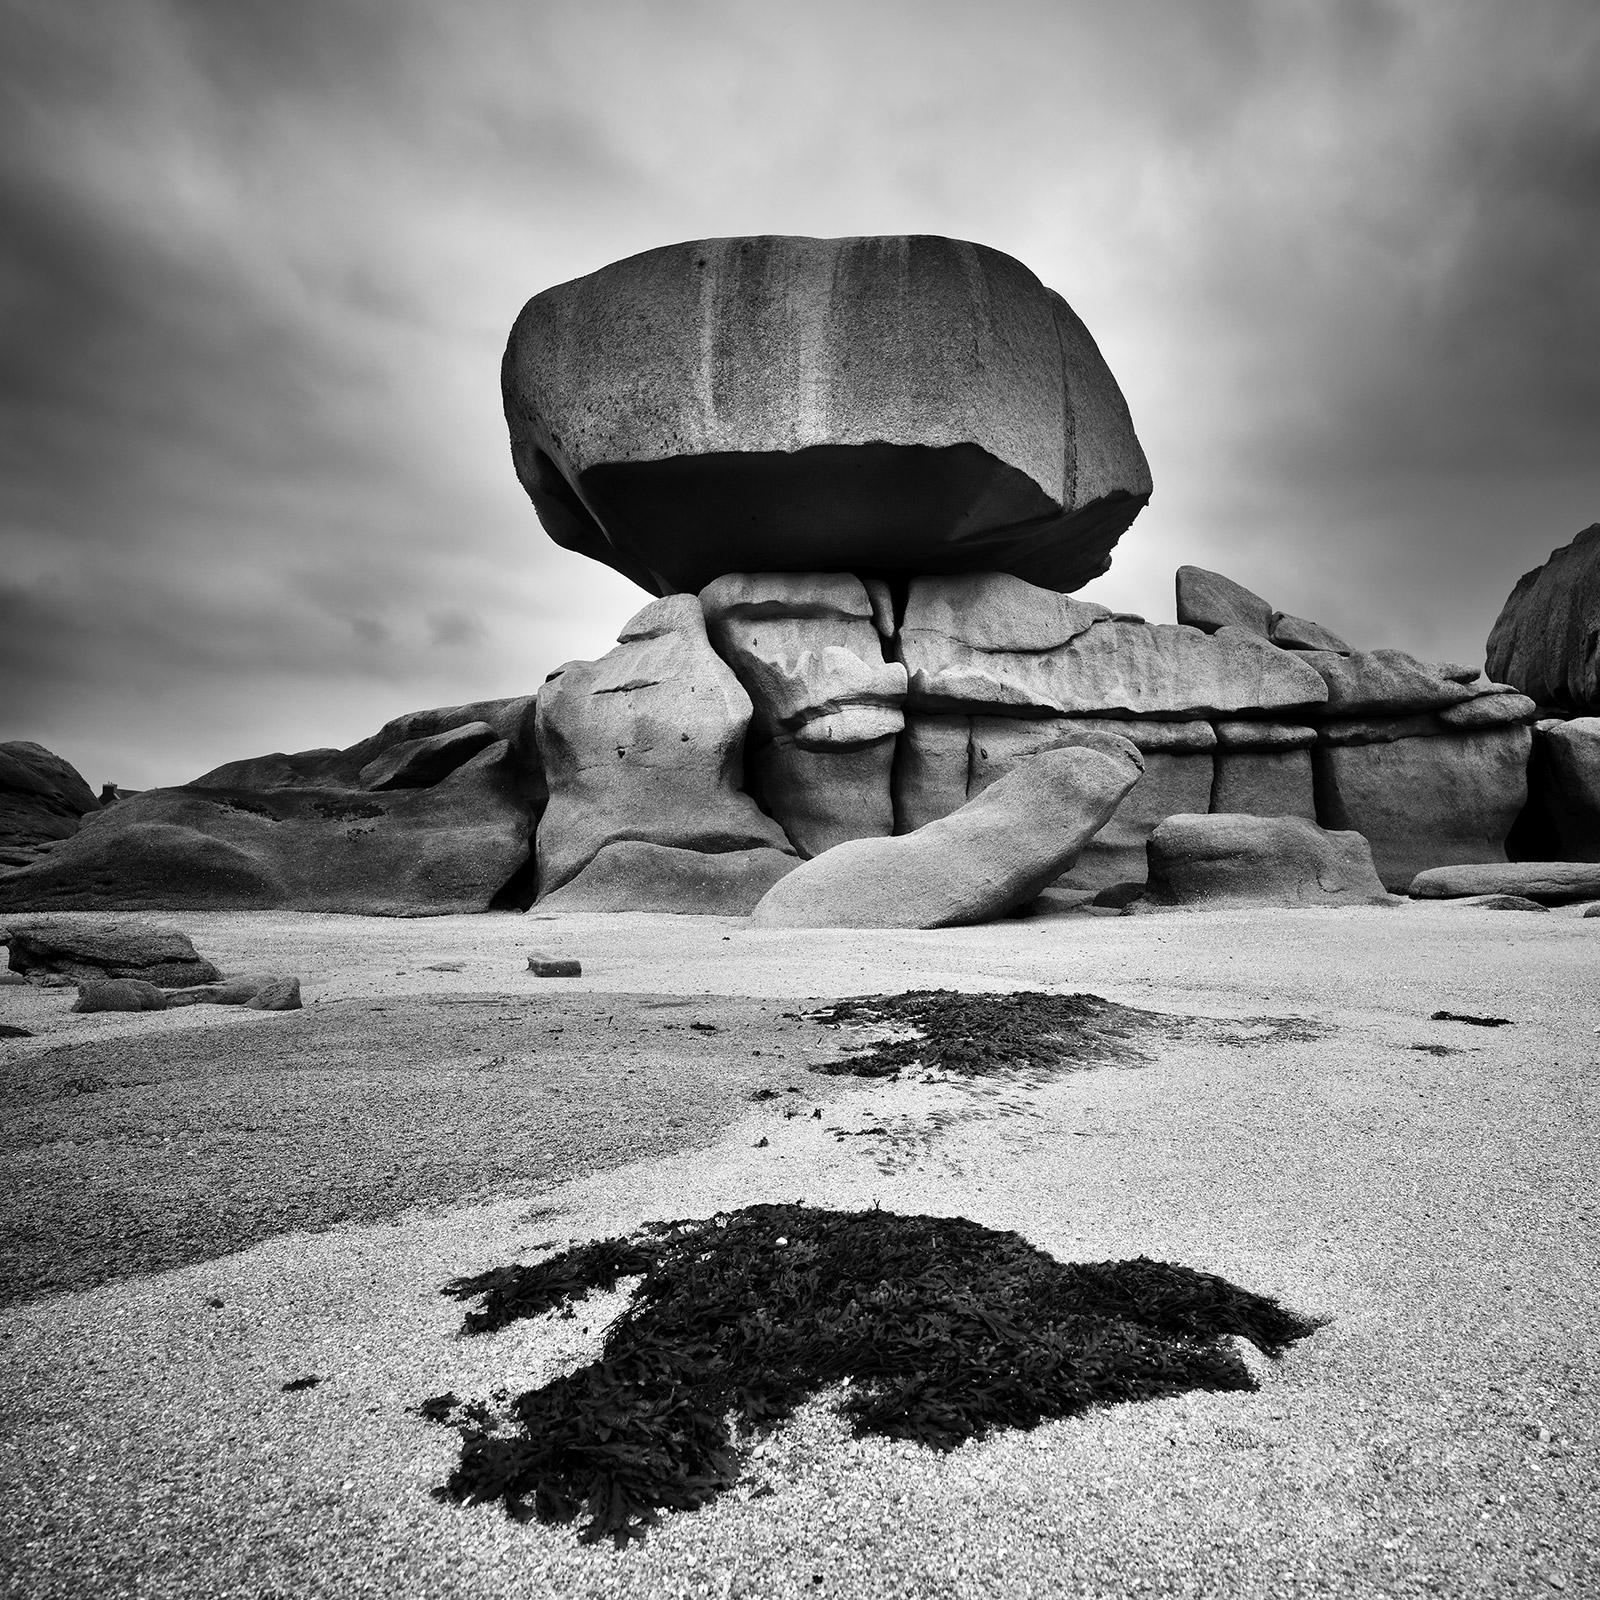 Gerald Berghammer Black and White Photograph - Pink Granite Coast, Giant Rock, France, black and white landscape photography